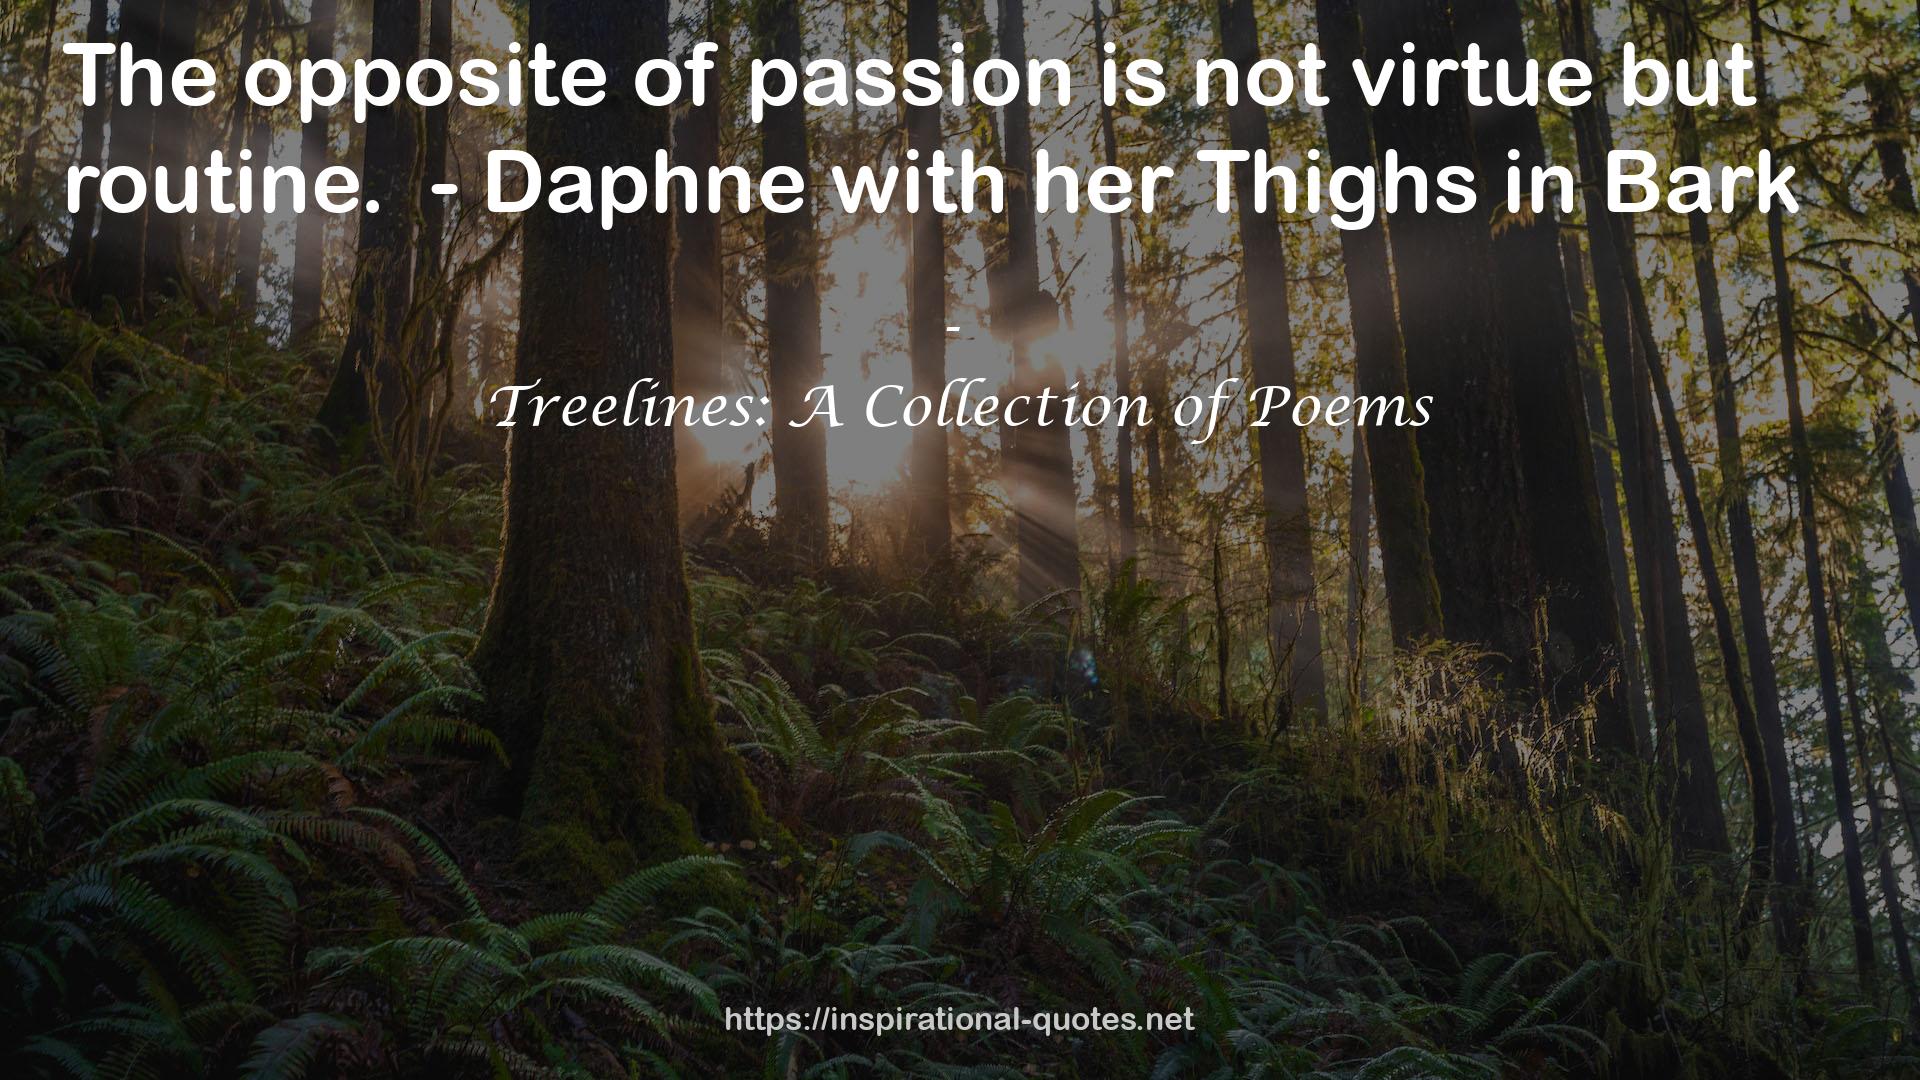 Treelines: A Collection of Poems QUOTES